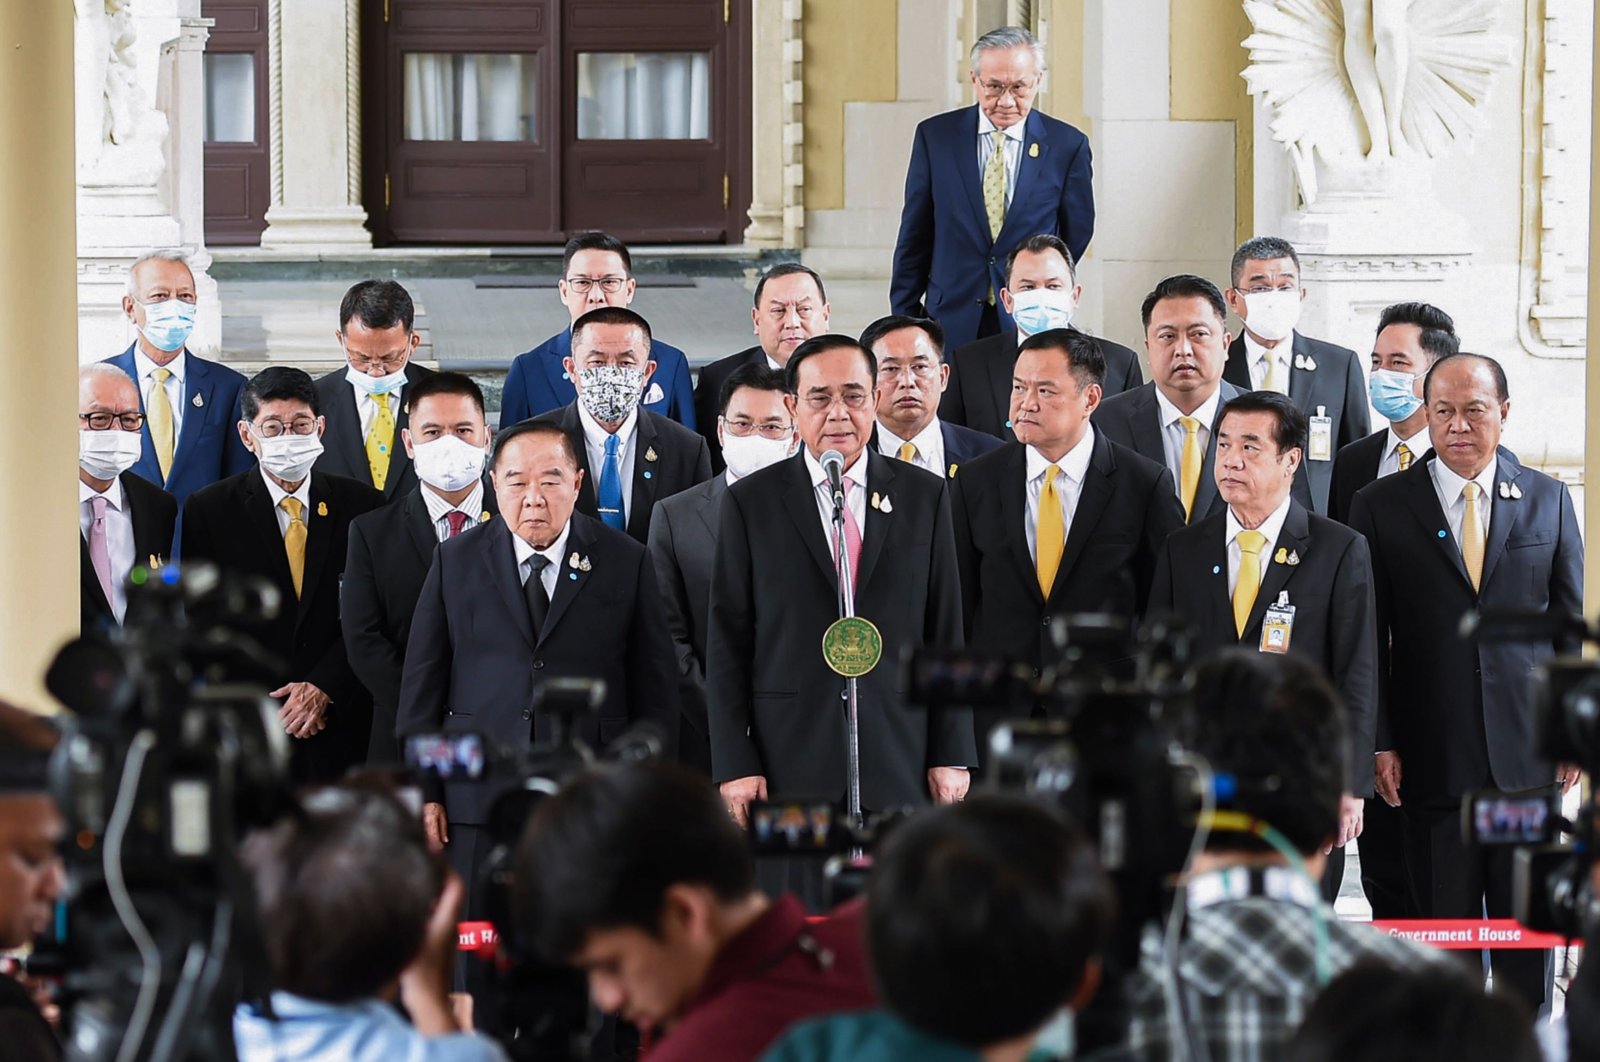 Thailand's Prime Minister Prayut Chan-O-Cha speaking at a press conference at the Government House in Bangkok while cabinet ministers look on following a cabinet meeting on Oct. 16, 2020. (Royal Thai government Photo via AFP)